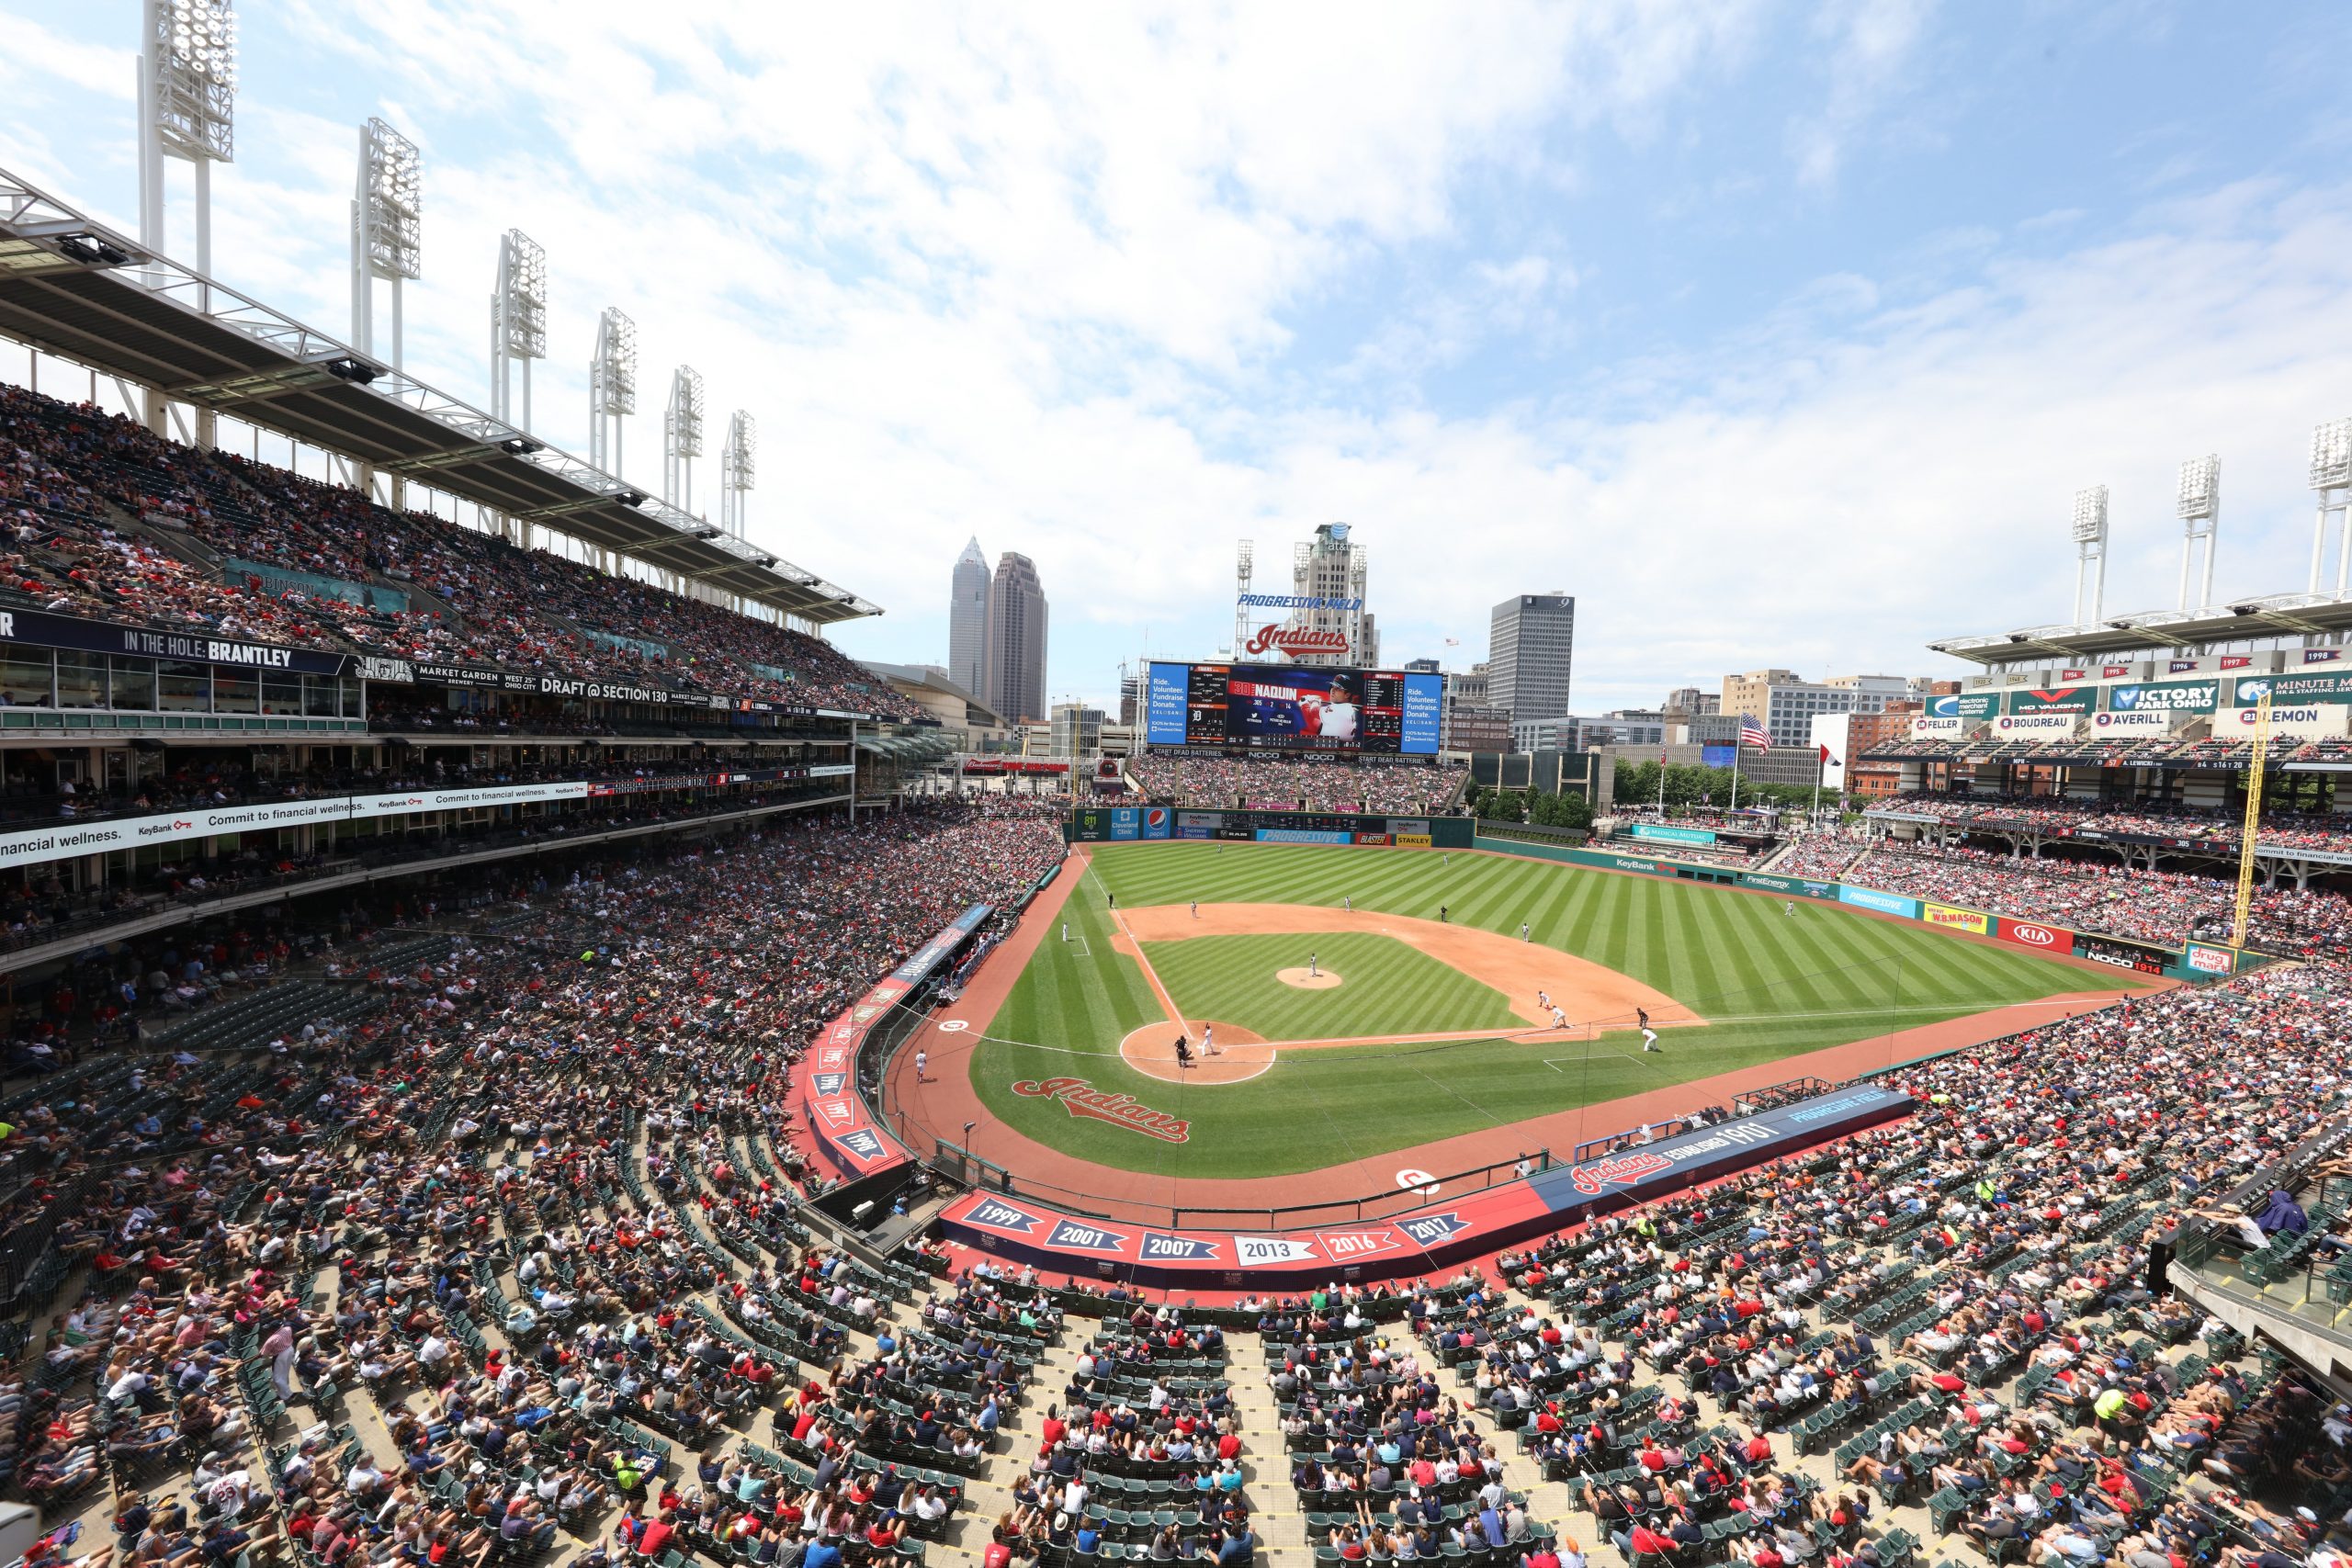 Cleveland baseball team to drop the nickname ‘Indians’ after racist allegations: Report